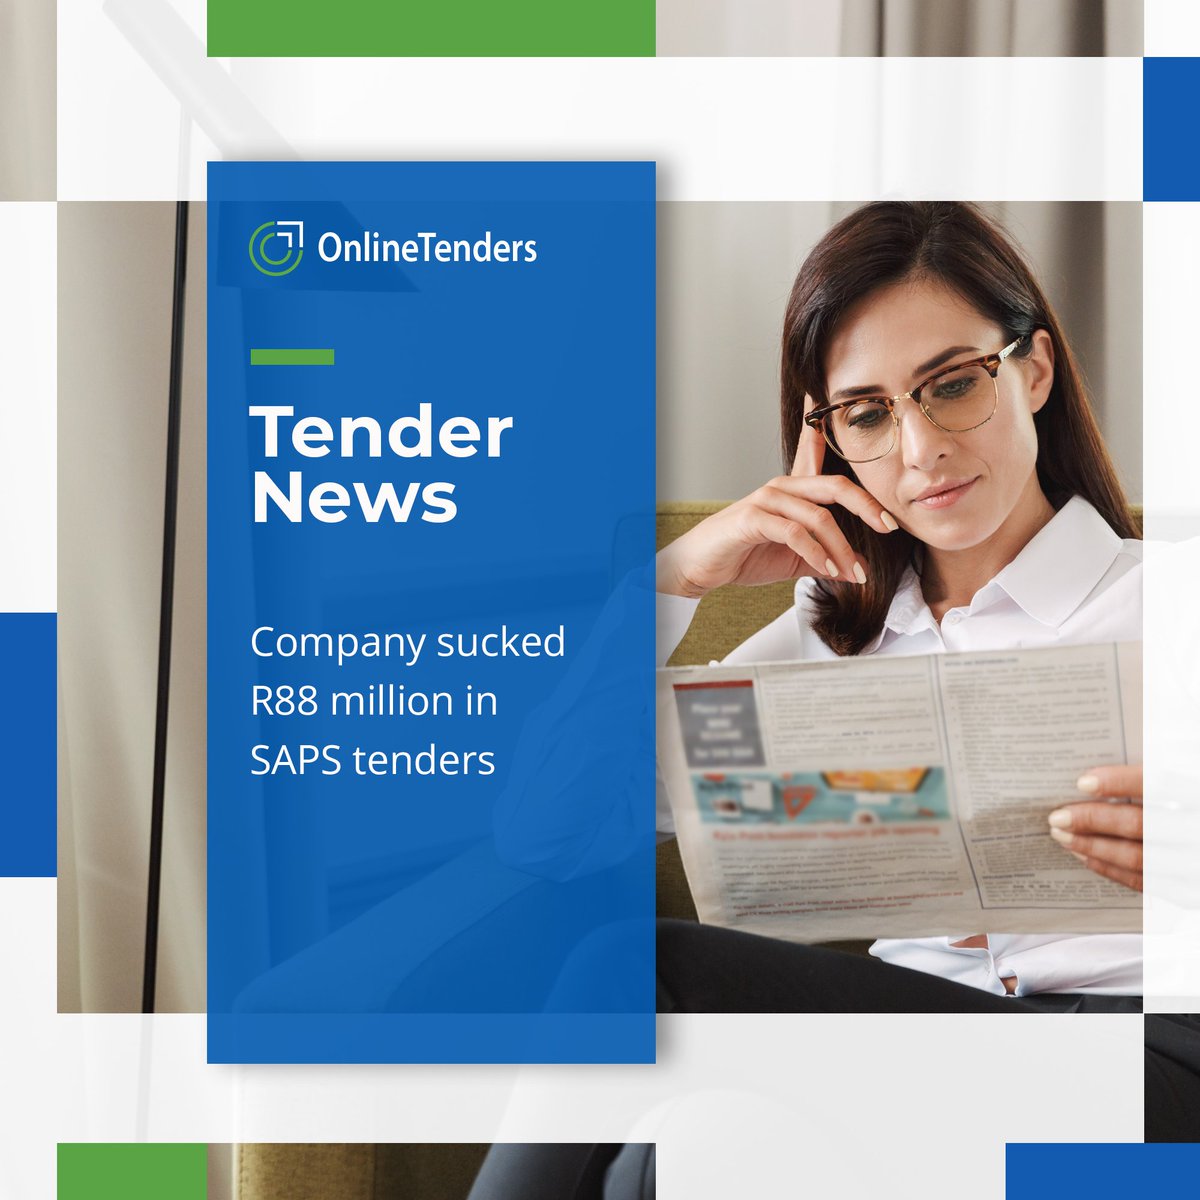 Latest Tender News: Company sucked R88 million in SAPS tenders

#news #tendernews #businessnews #sagovernment #southafricanbusiness #onlinetenders 

onlinetenders.co.za/news/company-s…